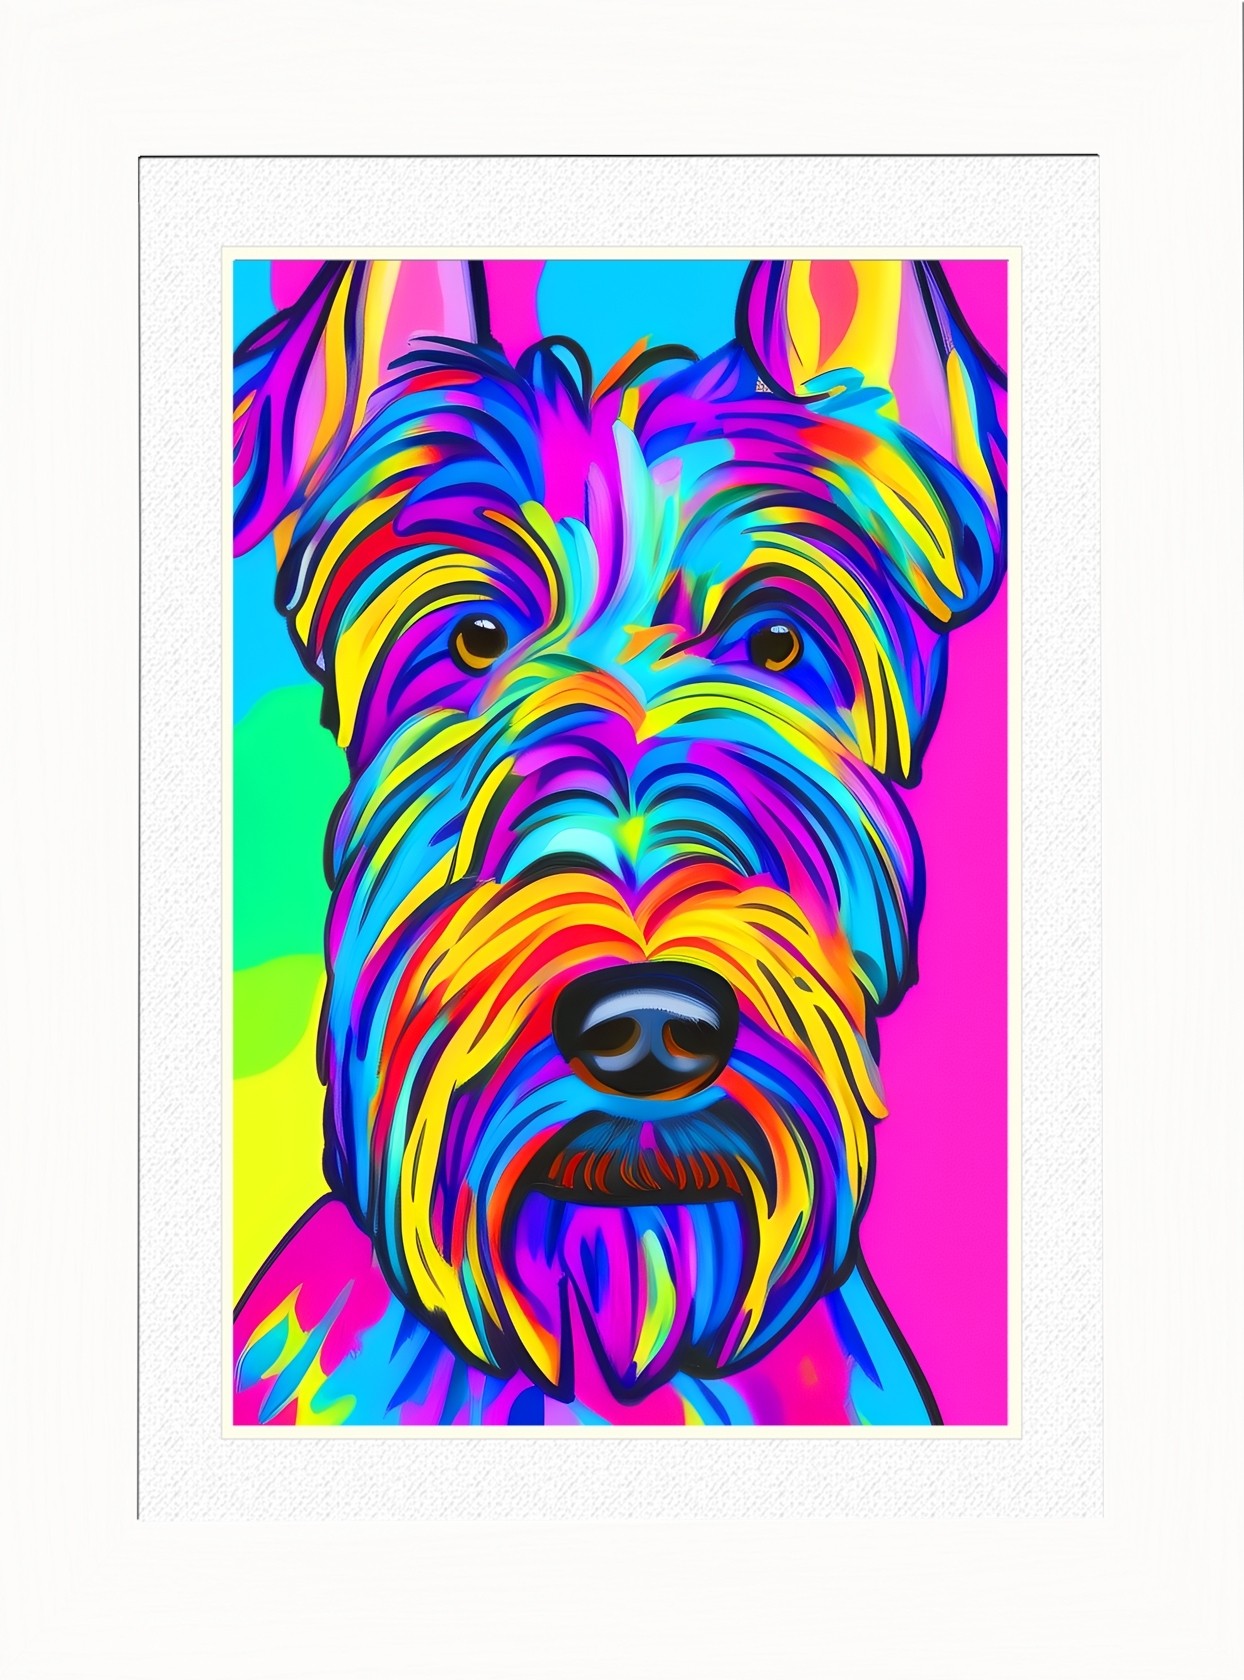 Scottish Terrier Dog Picture Framed Colourful Abstract Art (A3 White Frame)